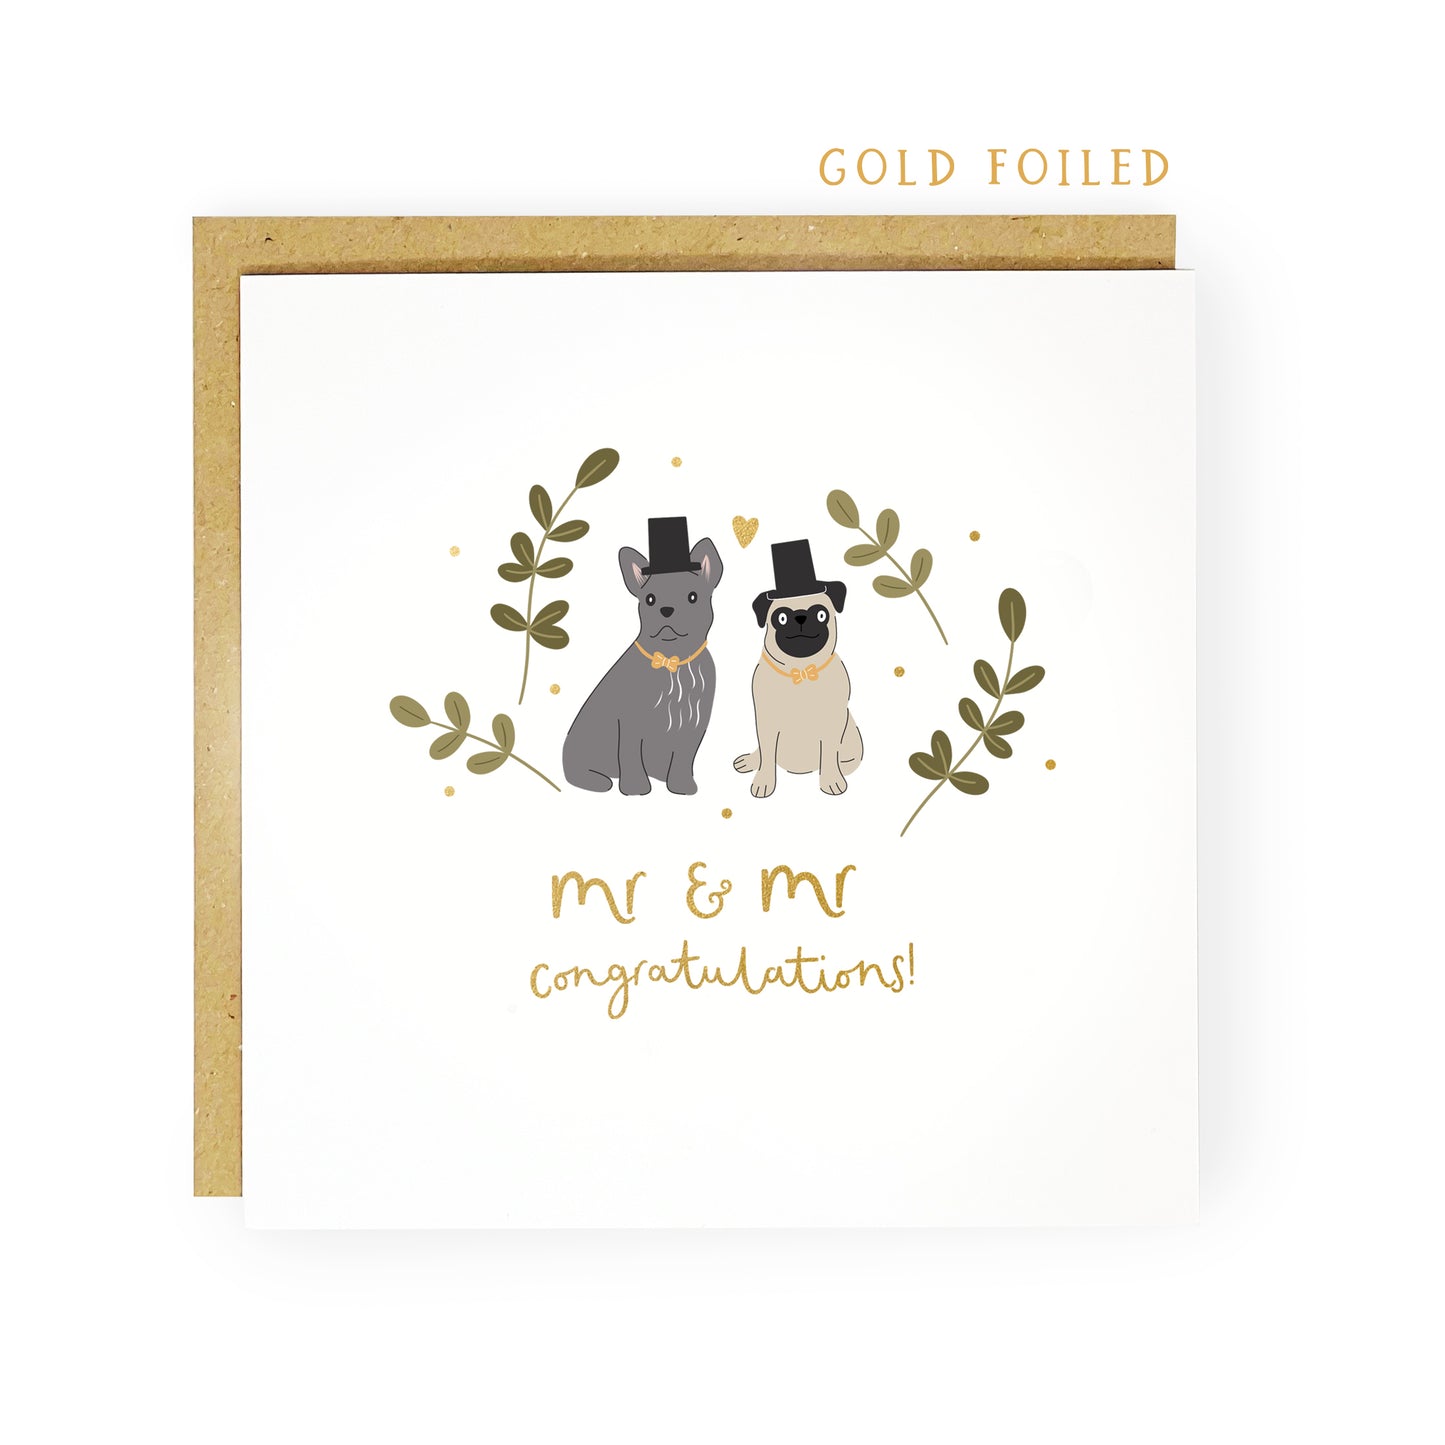 Mr and Mr gold foiled dog wedding engagement card by Abbie Imagine featuring a pug and french bulldog